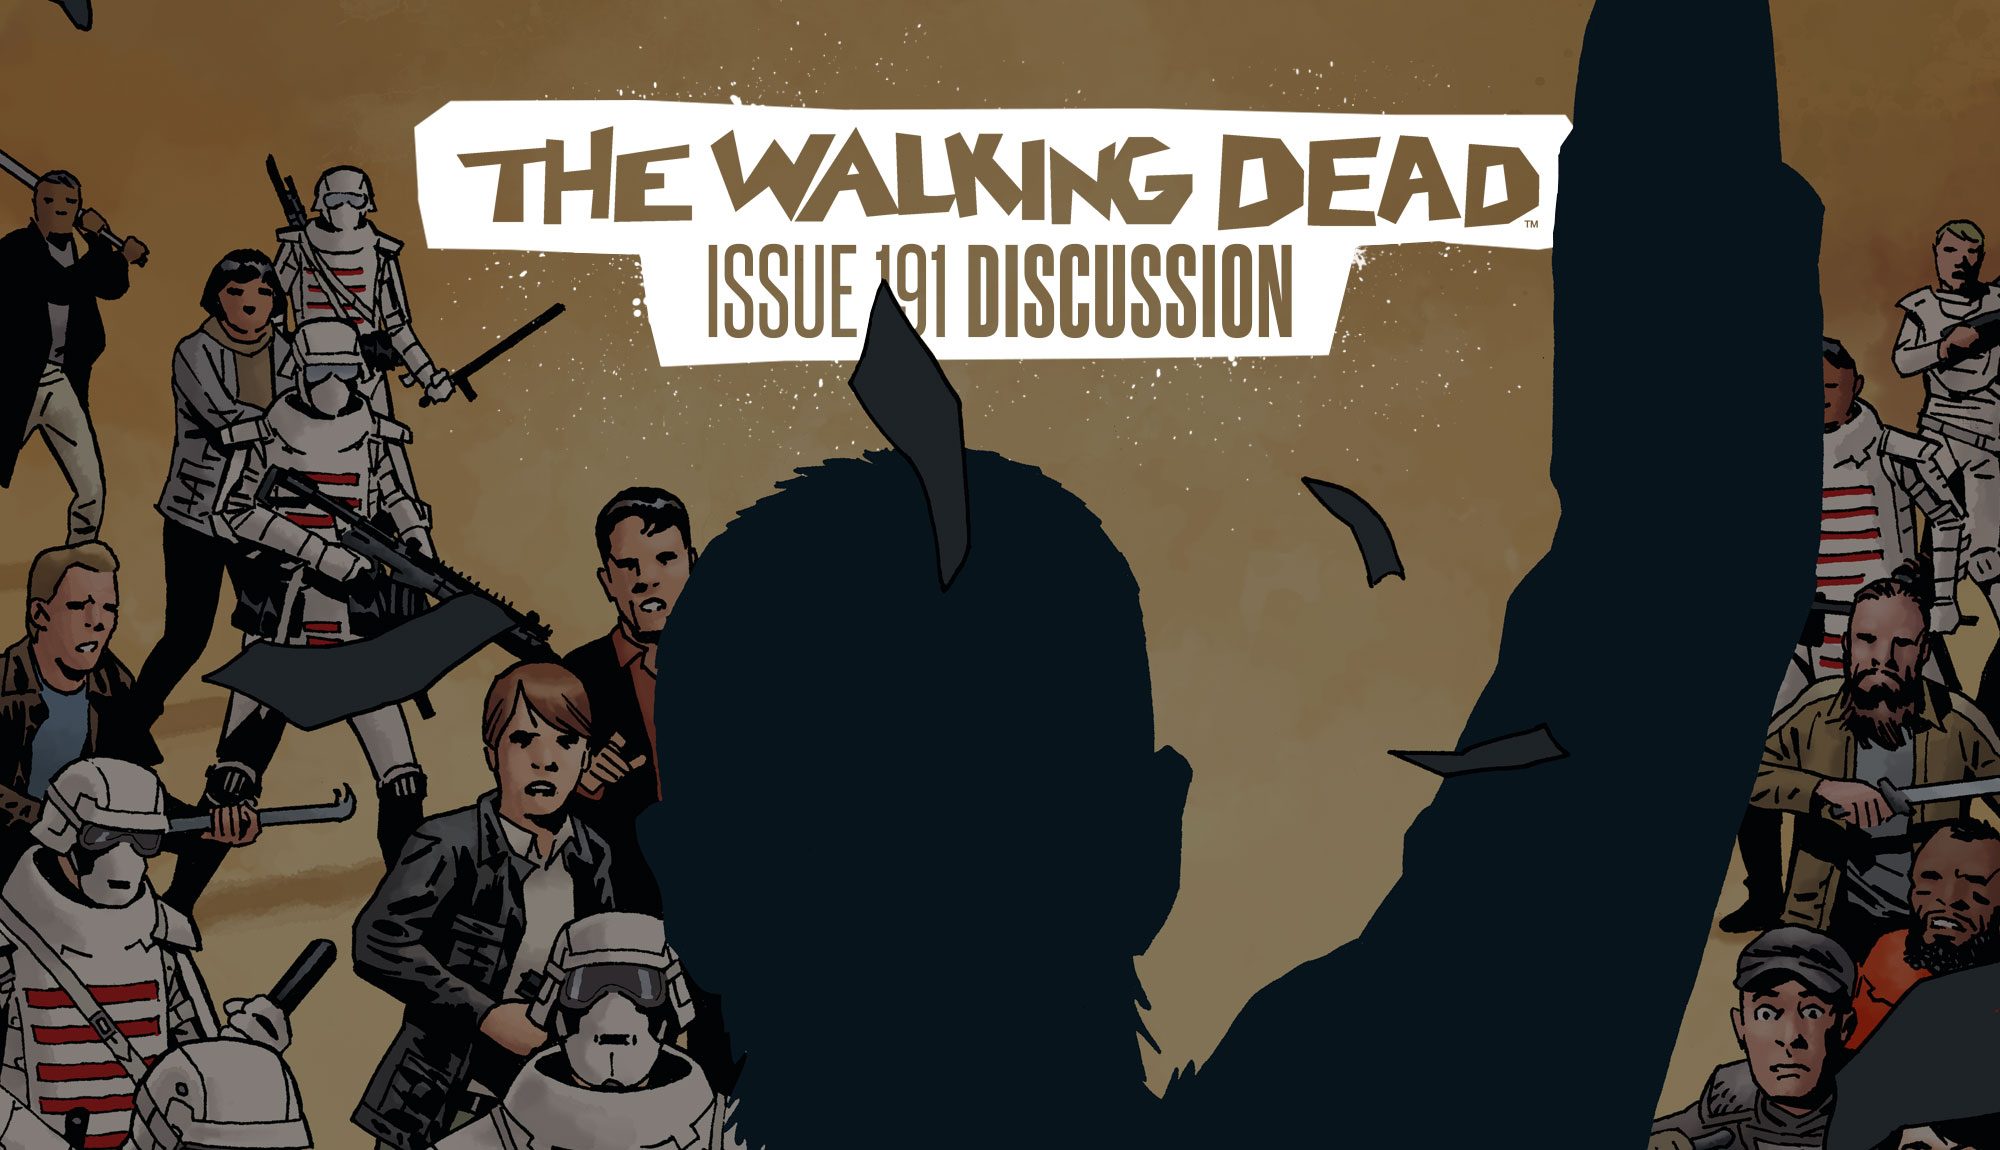 The Walking Dead Issue 191 “The Last Stand” Reader Discussion